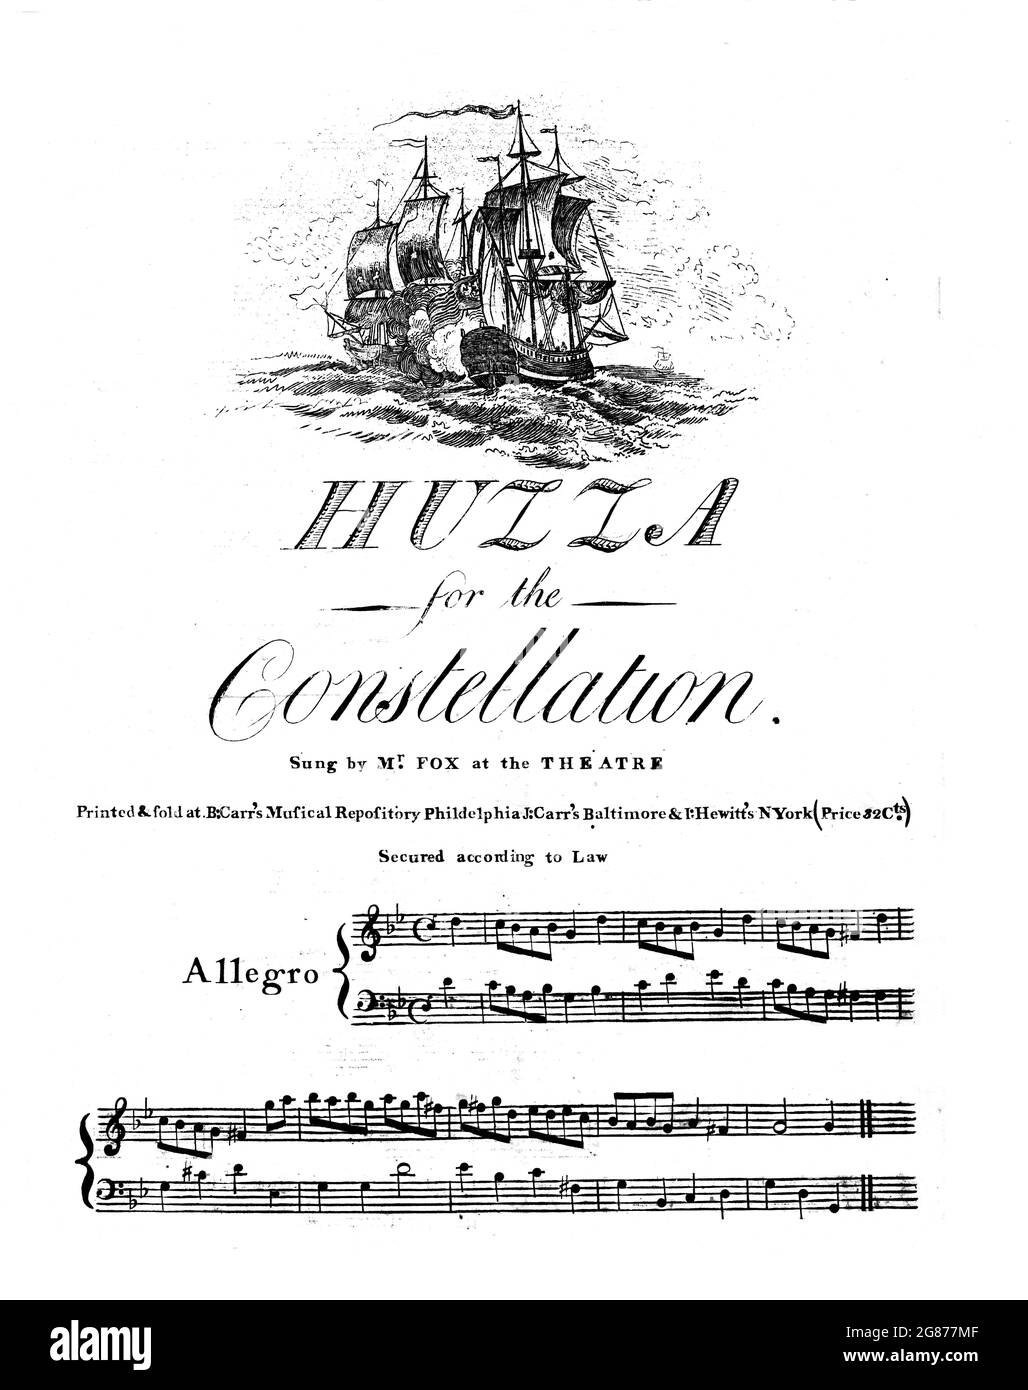 Huzza for the Constellation, 1799 engraved sheet music of Truxtun's USS Constellation and the French sjip L'Insurgente. in Barbary Wars. Stock Photo